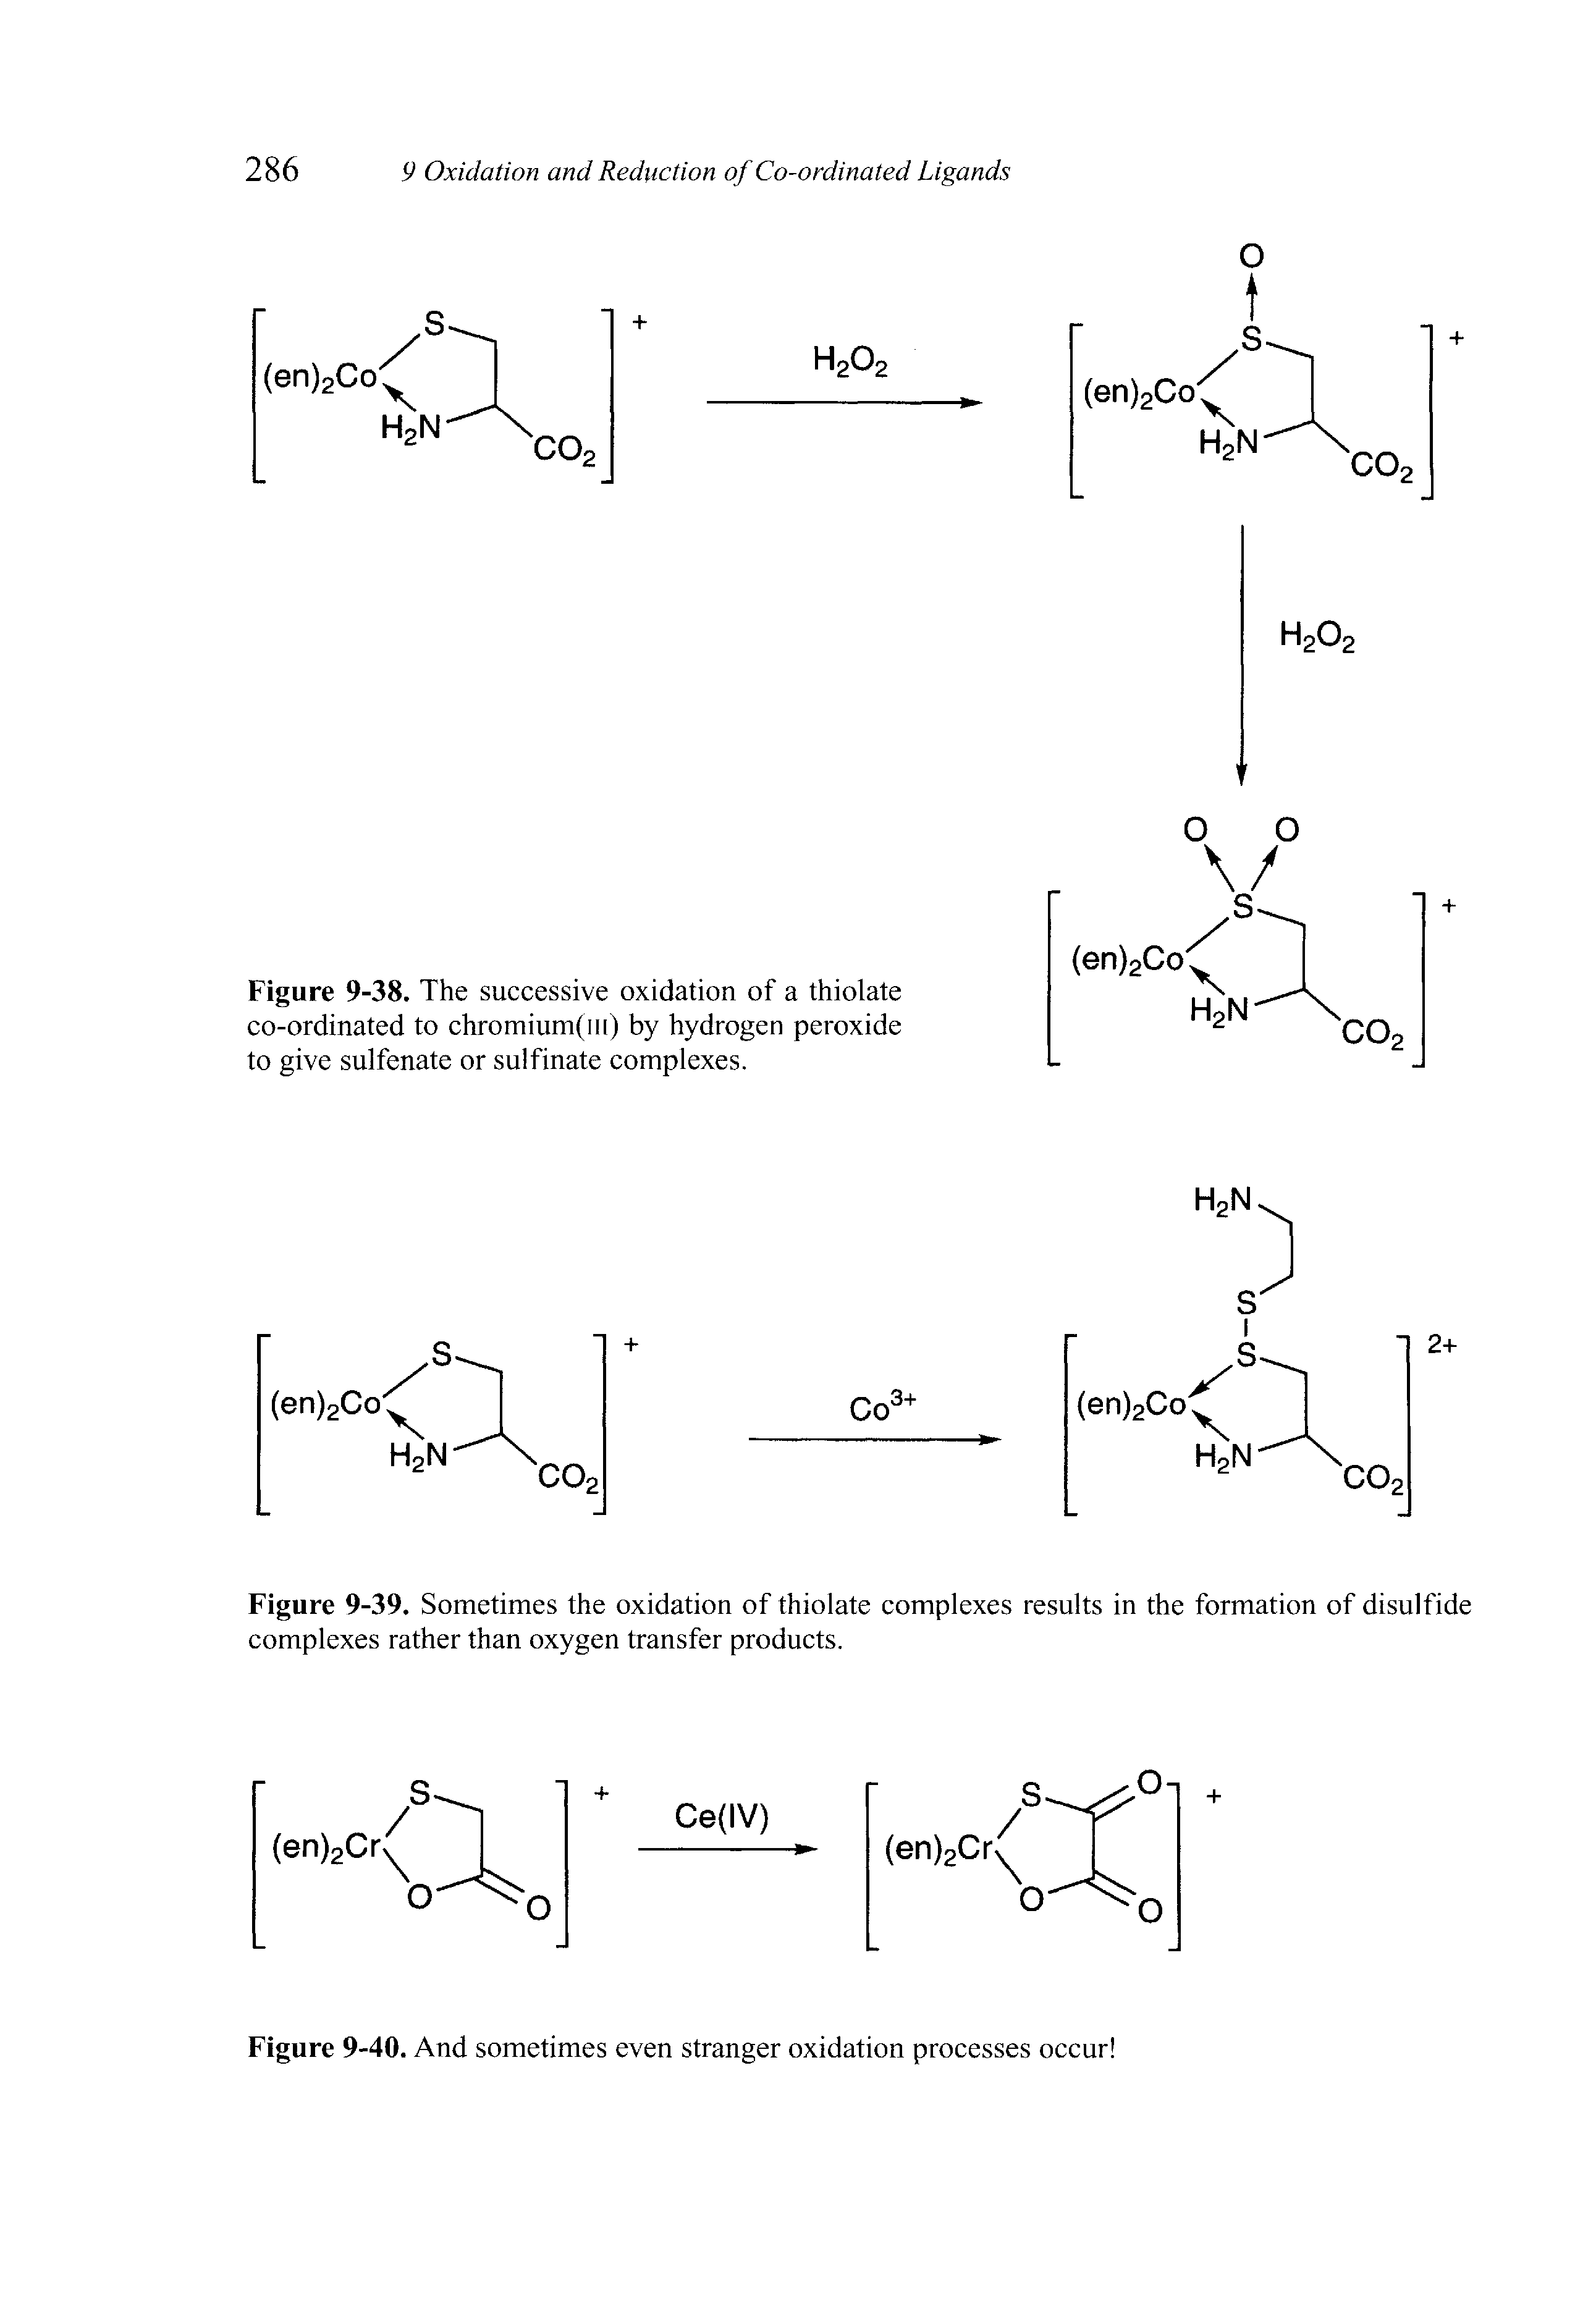 Figure 9-38. The successive oxidation of a thiolate co-ordinated to chromium(in) by hydrogen peroxide to give sulfenate or sulfinate complexes.